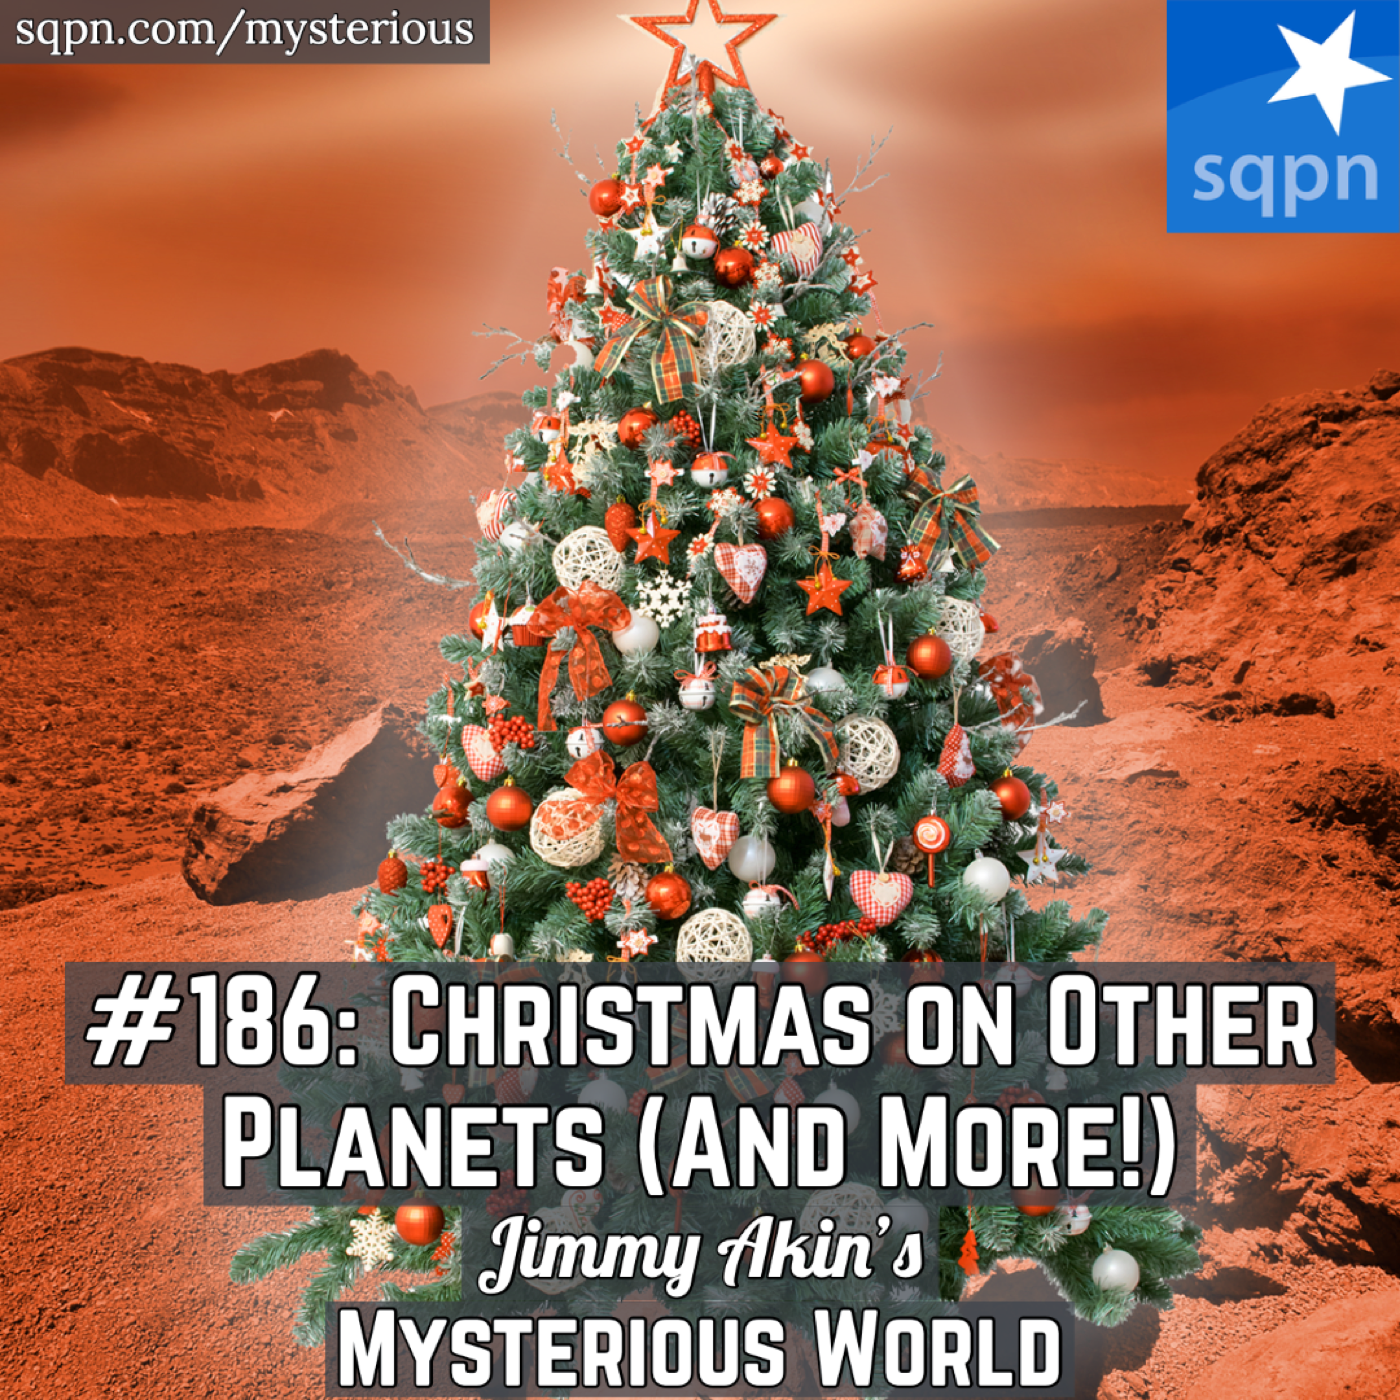 Christmas on other planets, when Christmas ends, from St. Nick to Santa, 12 days of Christmas code? . . . & Weird Questions